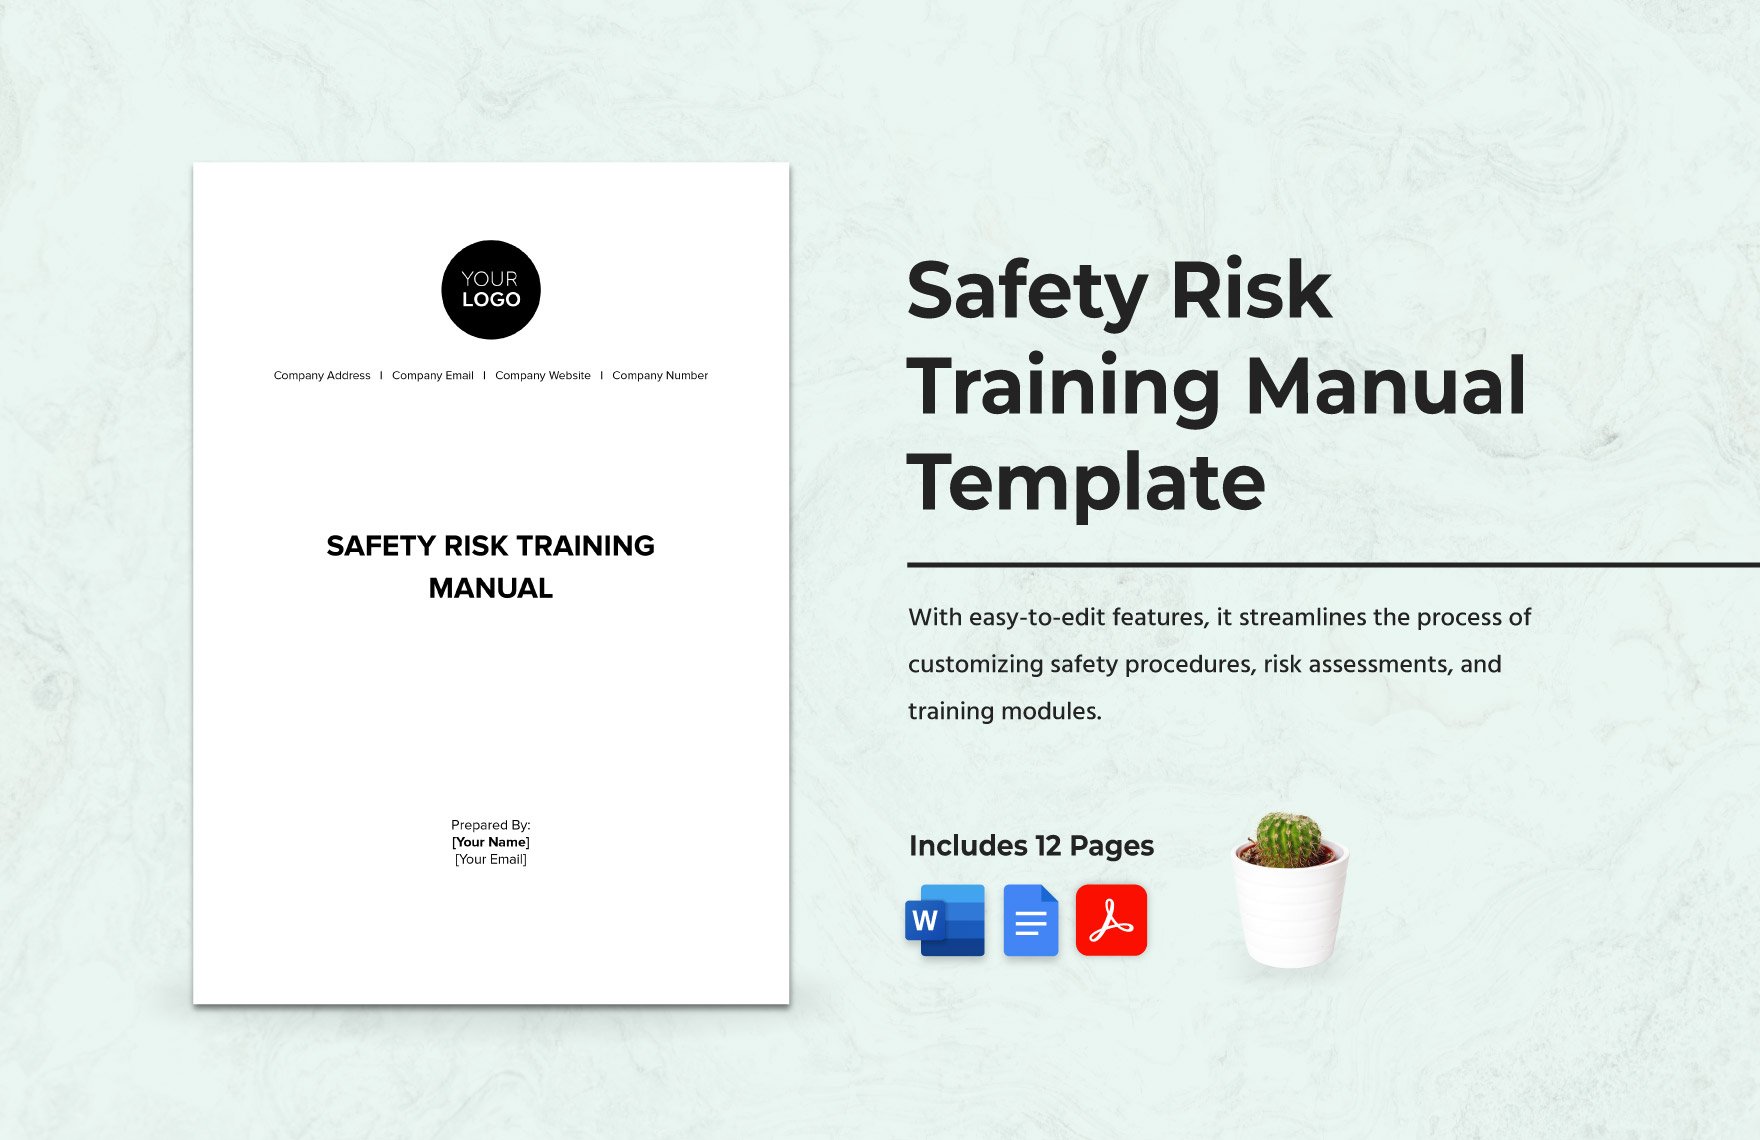 Safety Risk Training Manual Template